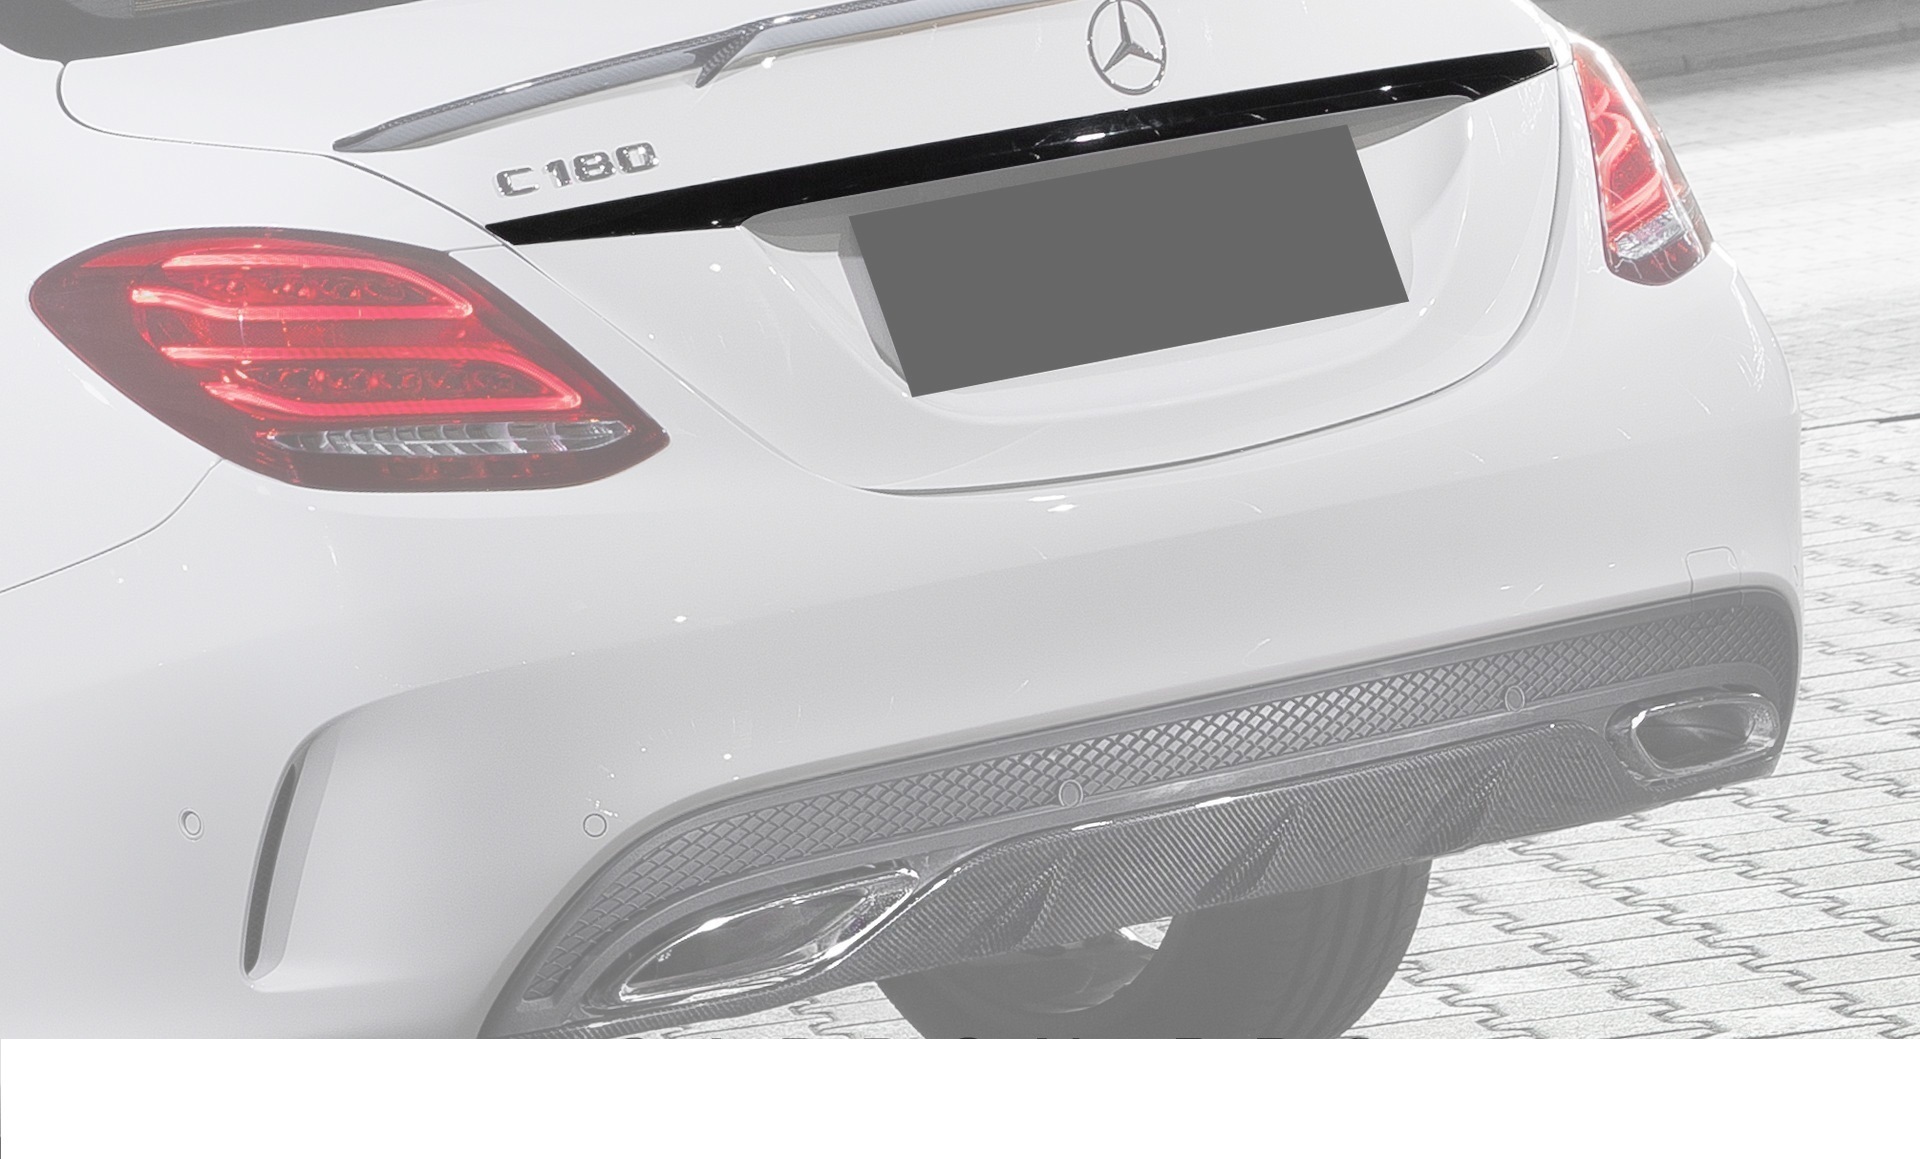 Hodoor Performance Carbon fiber trim on the trunk above number 63 AMG Brabus style Mercedes C-class W205 new model